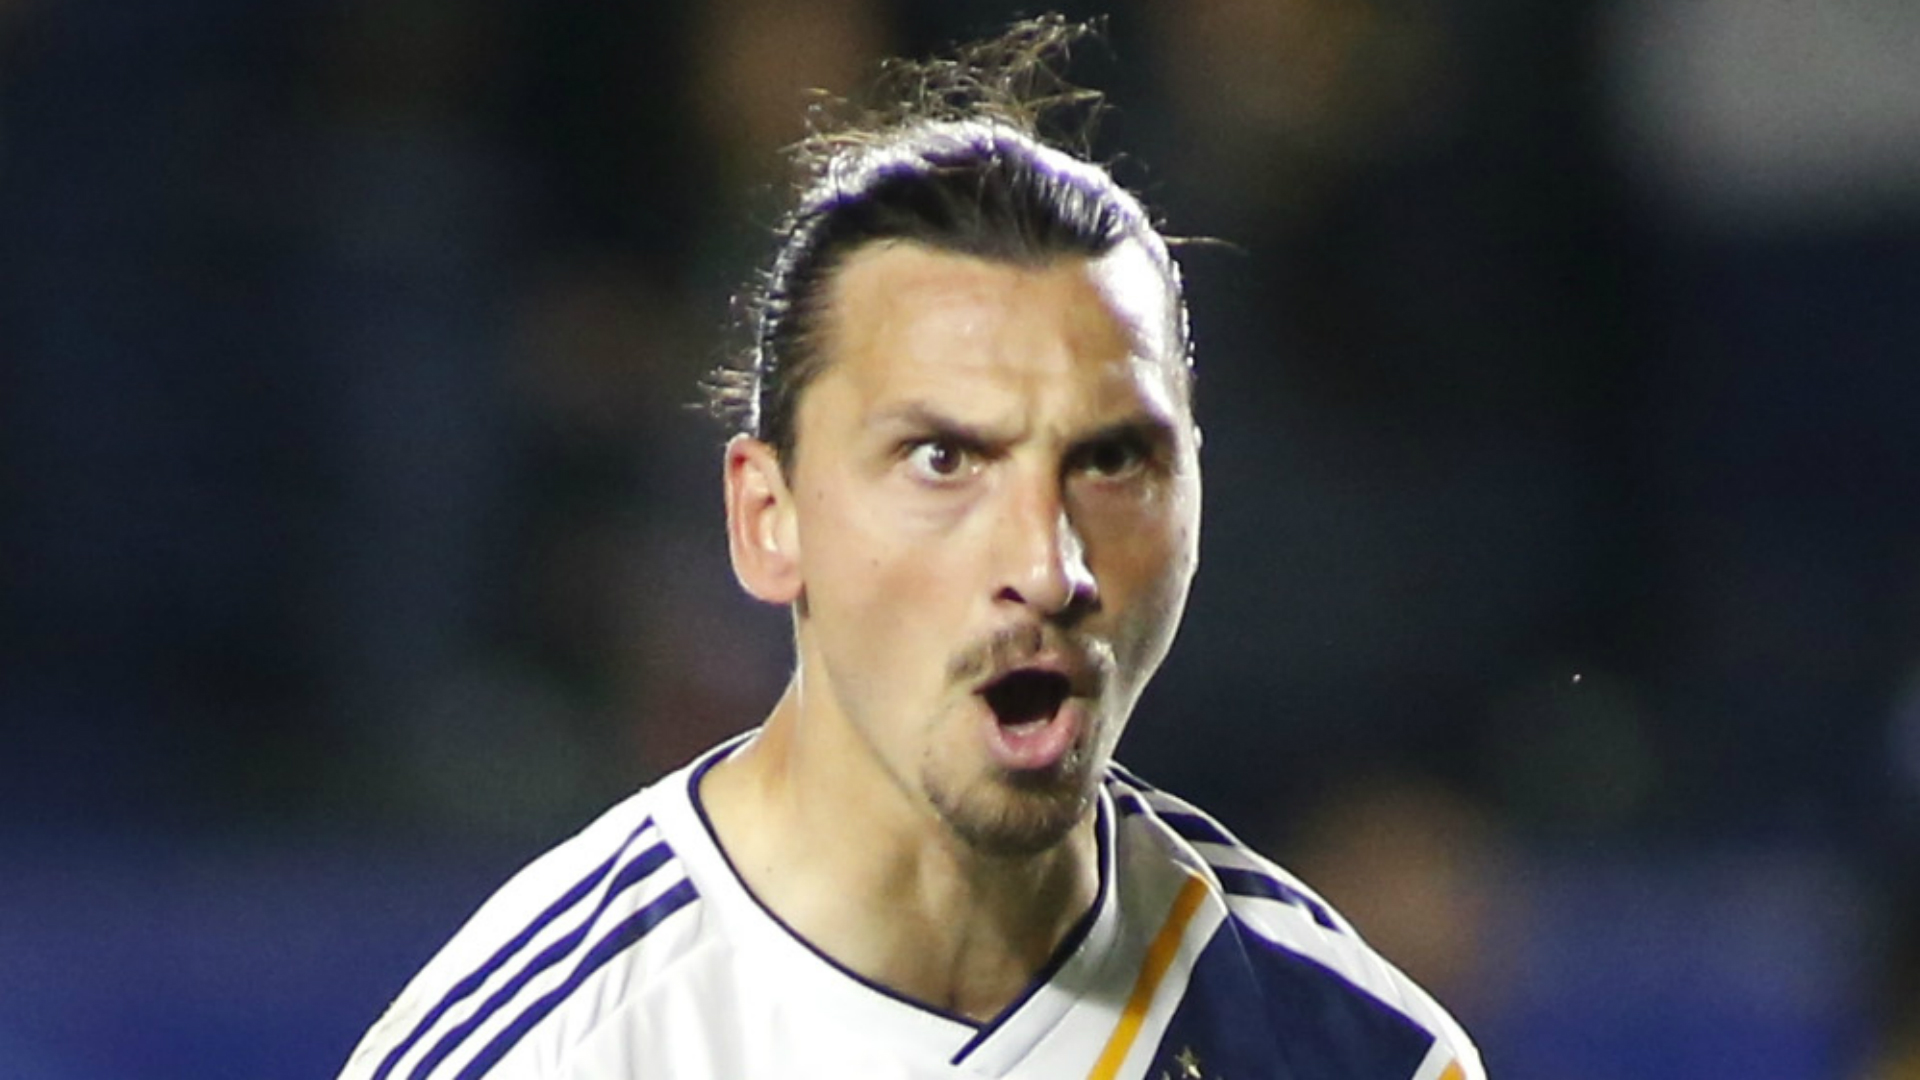 Bologna are trying to sign LA Galaxy striker Zlatan Ibrahimovic when his contract expires in December.